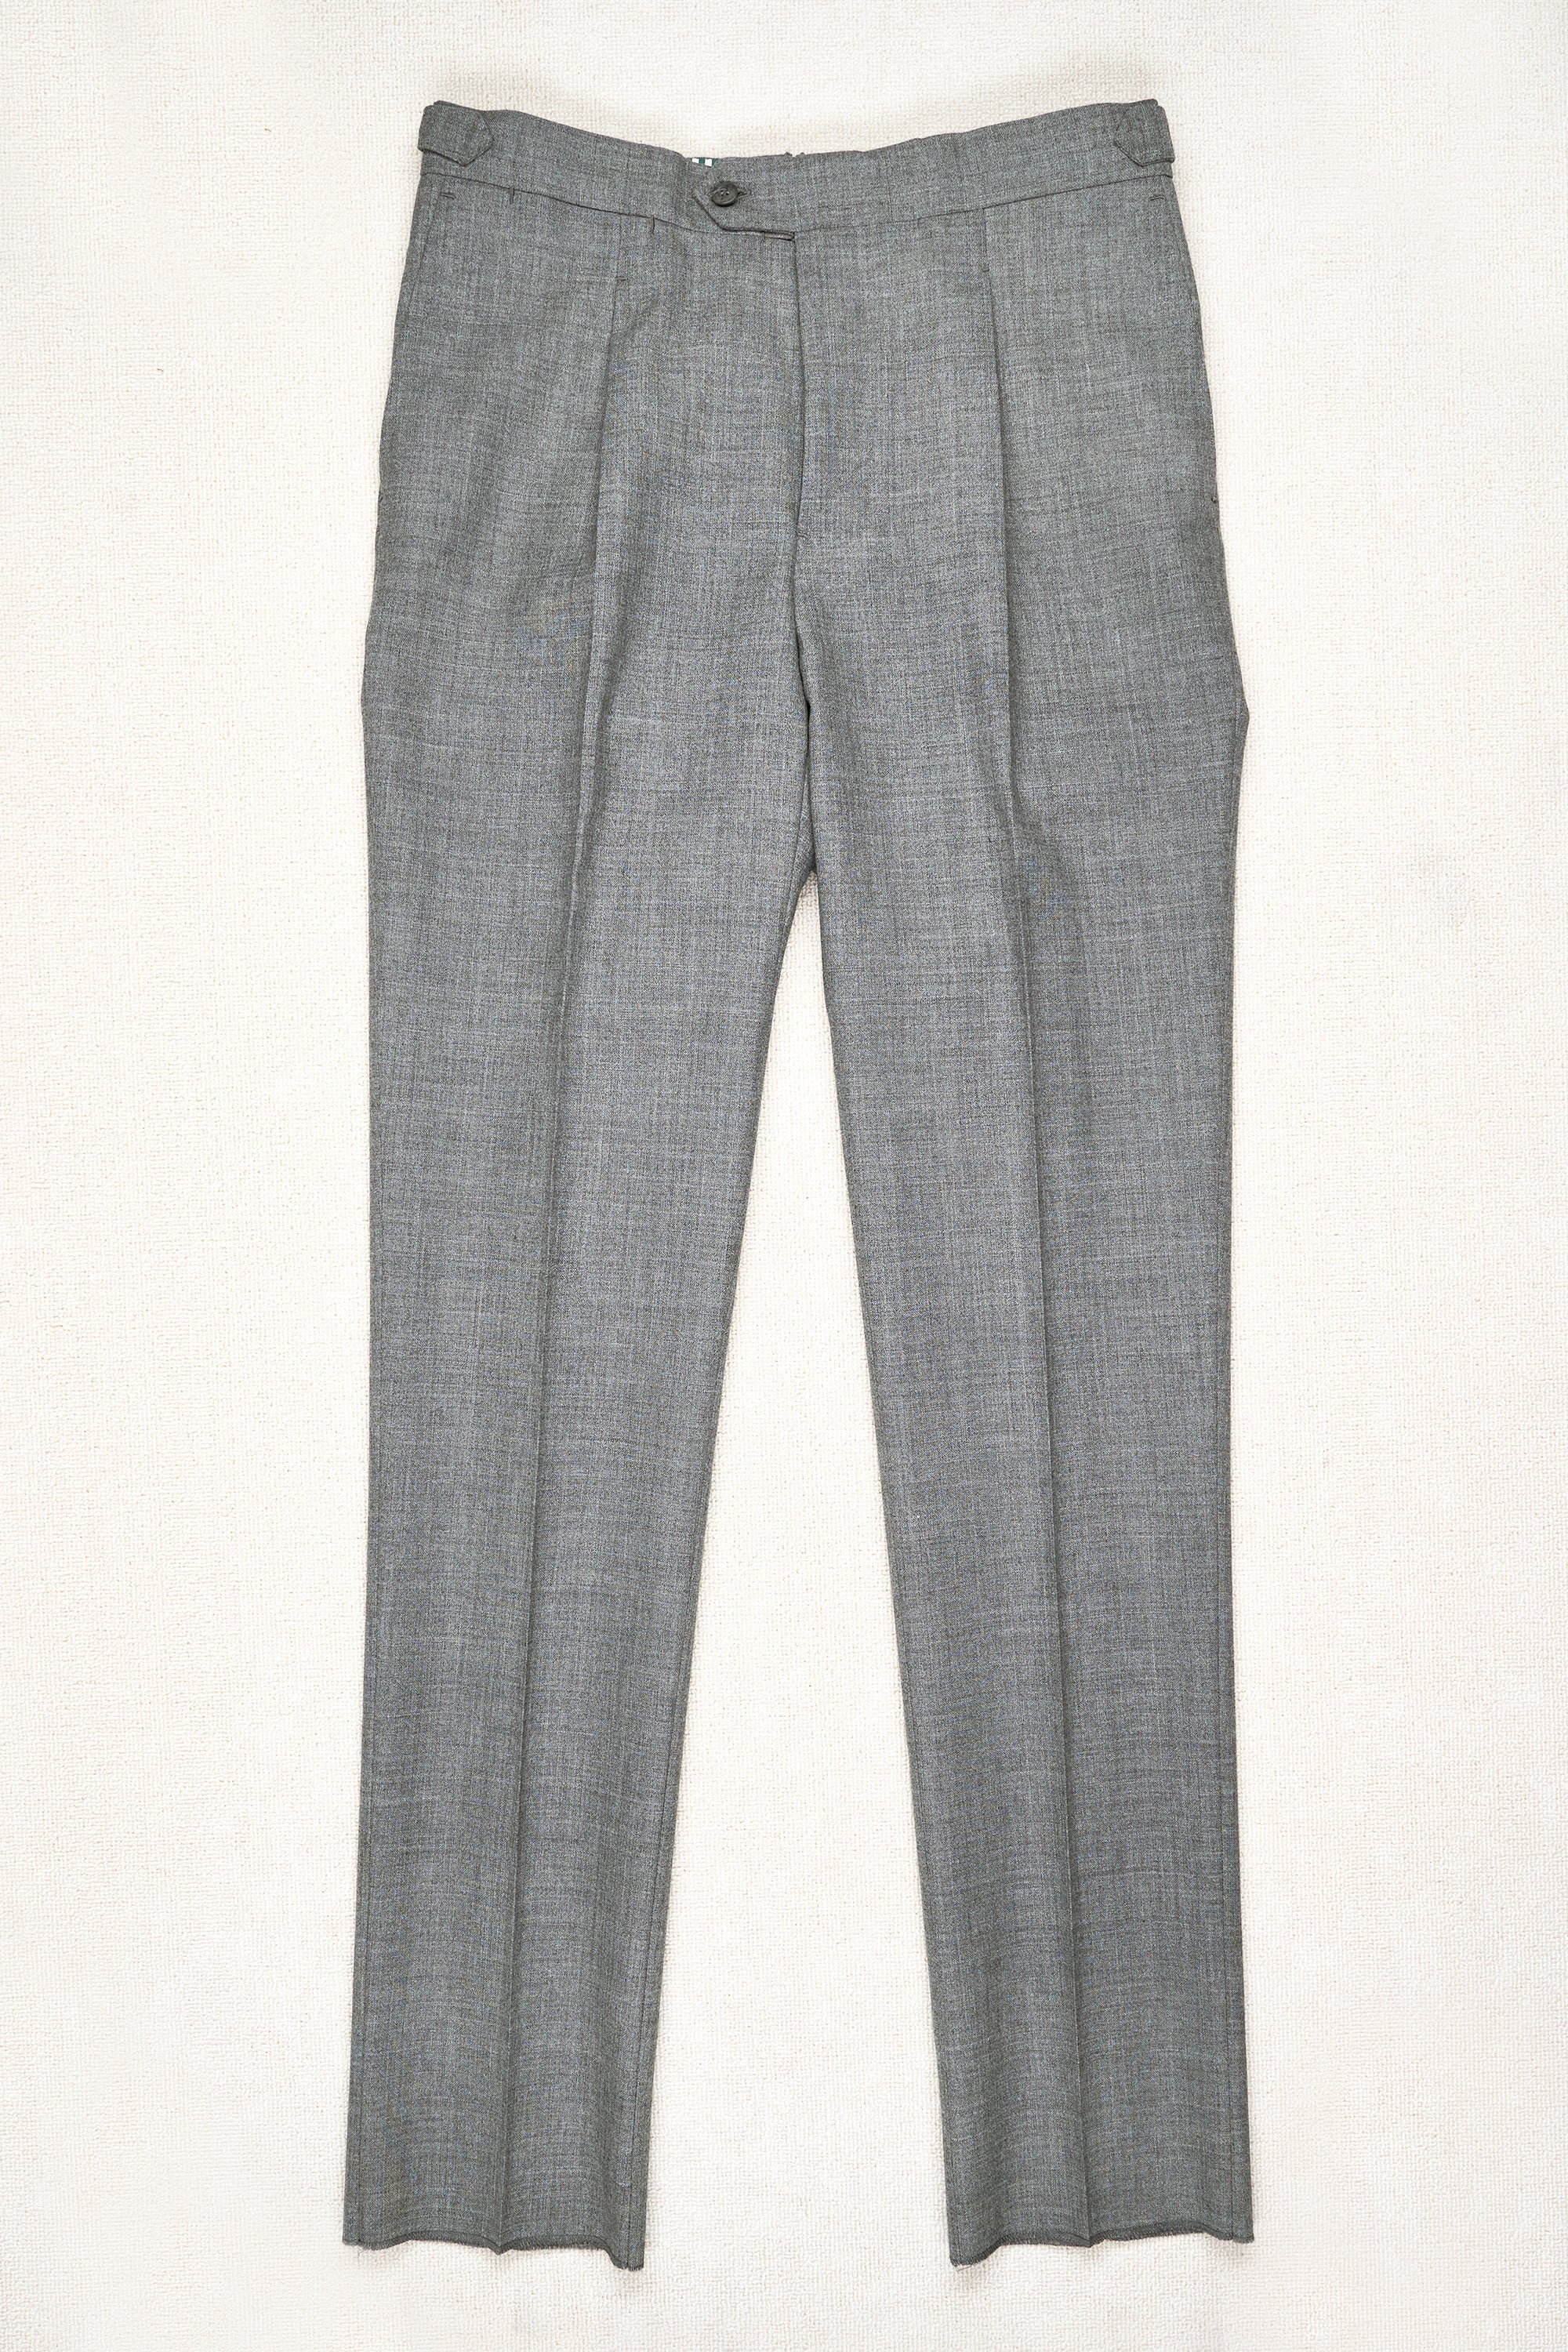 The Armoury by Pommella Light Grey Fox Air Side Tab Trousers